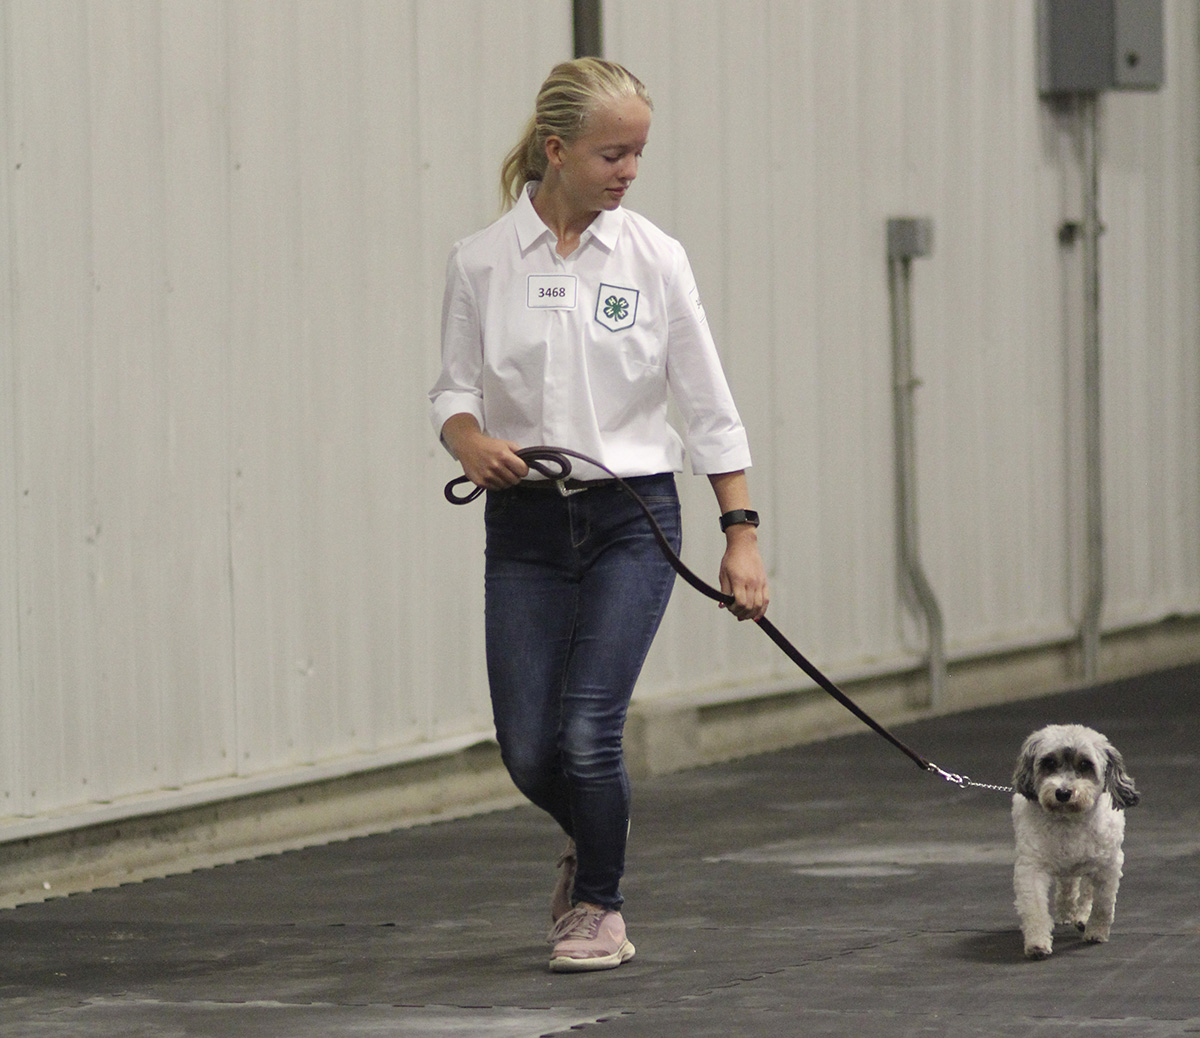  Dog Obedience at the 2019 Lancaster County Super Fair.